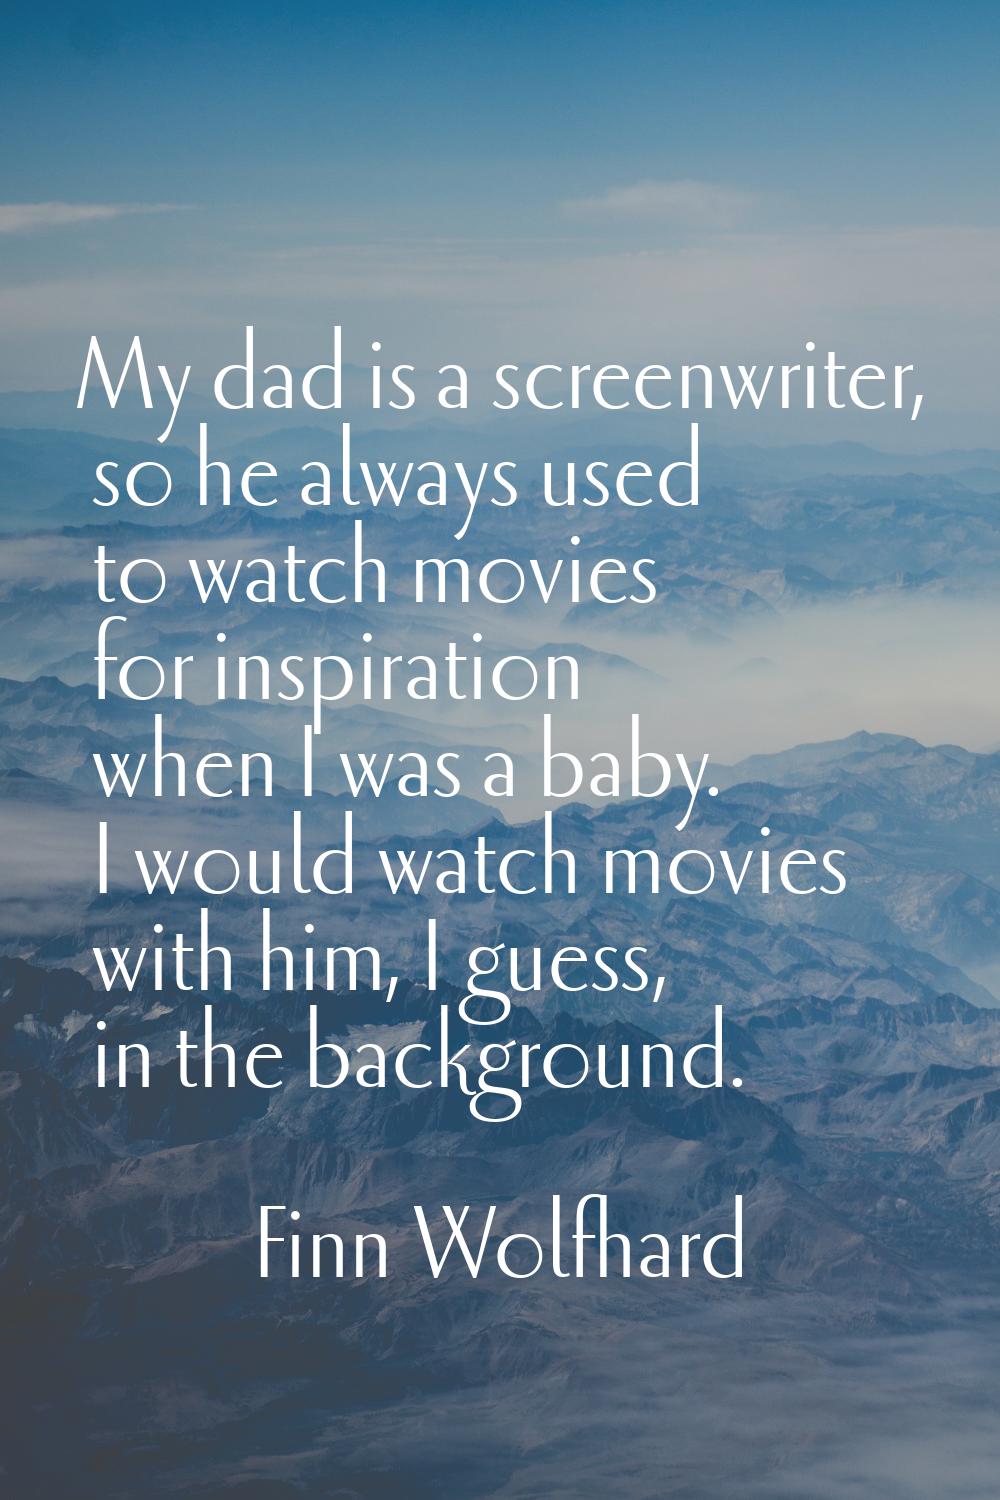 My dad is a screenwriter, so he always used to watch movies for inspiration when I was a baby. I wo